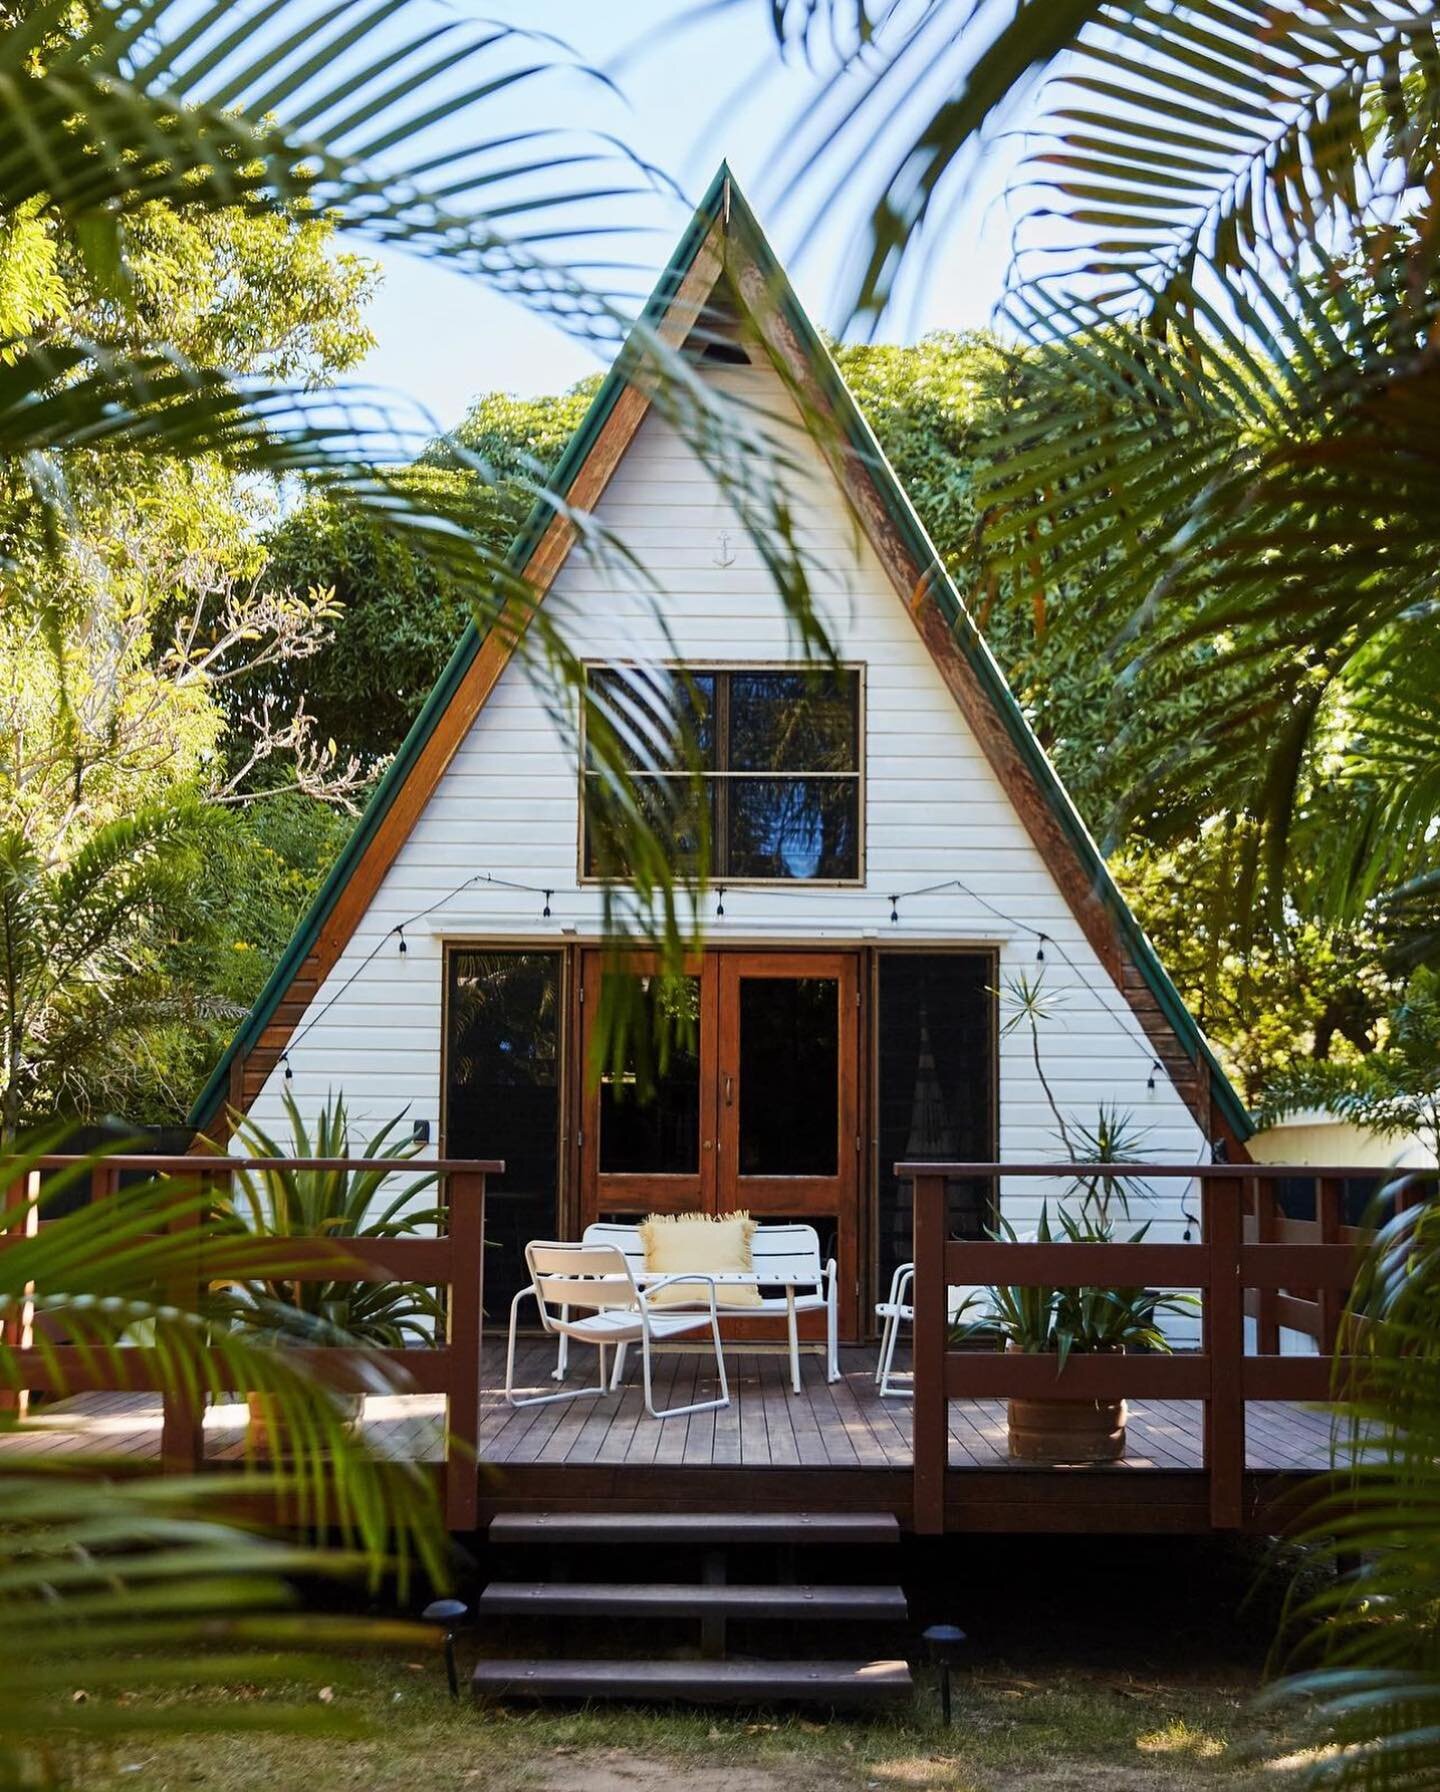 Tis the season for tropical A-Frames! Stay Awhile @maggieaframe 🌴 
📸 @laura.may.grogan 

Magnetic Island is always a little bit quirky. And this cute stay in Horseshoe Bay takes quirkiness to a new level. 

The cosy retreat, surrounded by lush palm